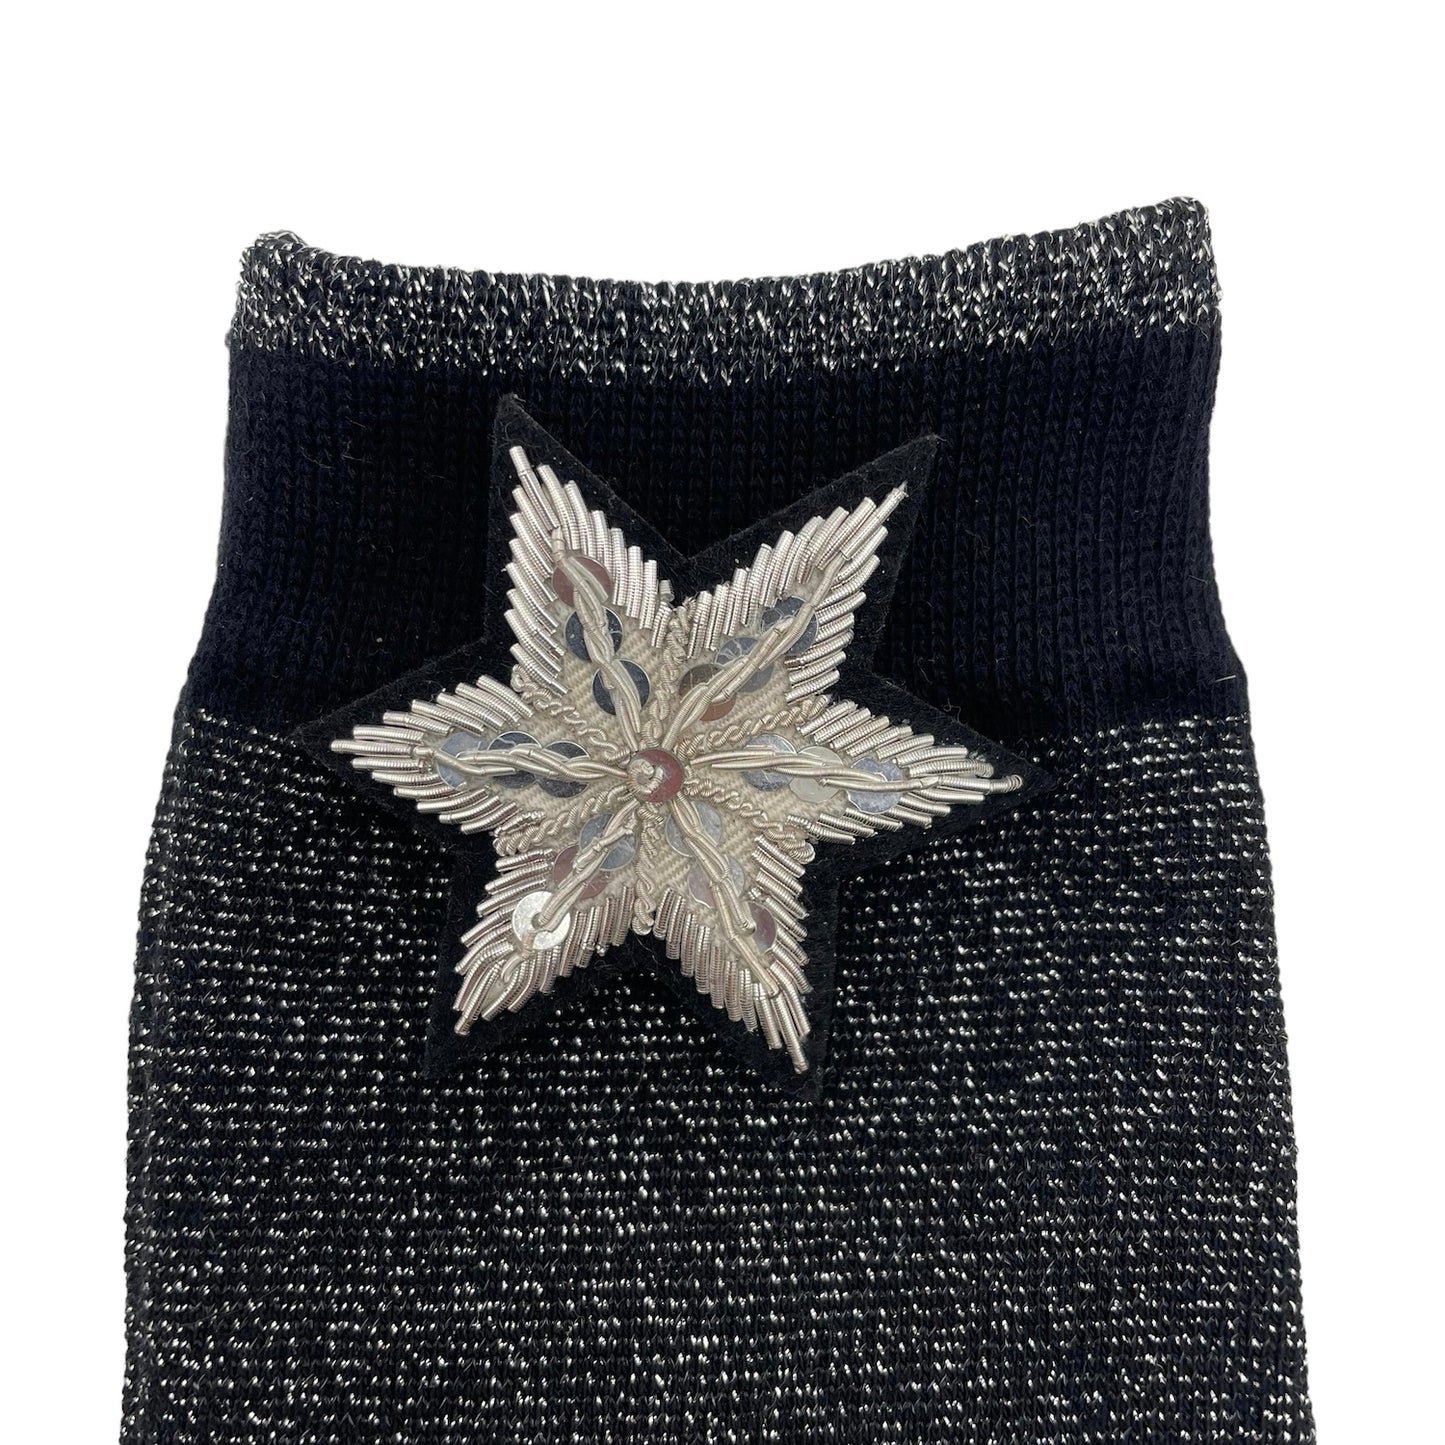 Tokyo socks in black with a sequin star pin